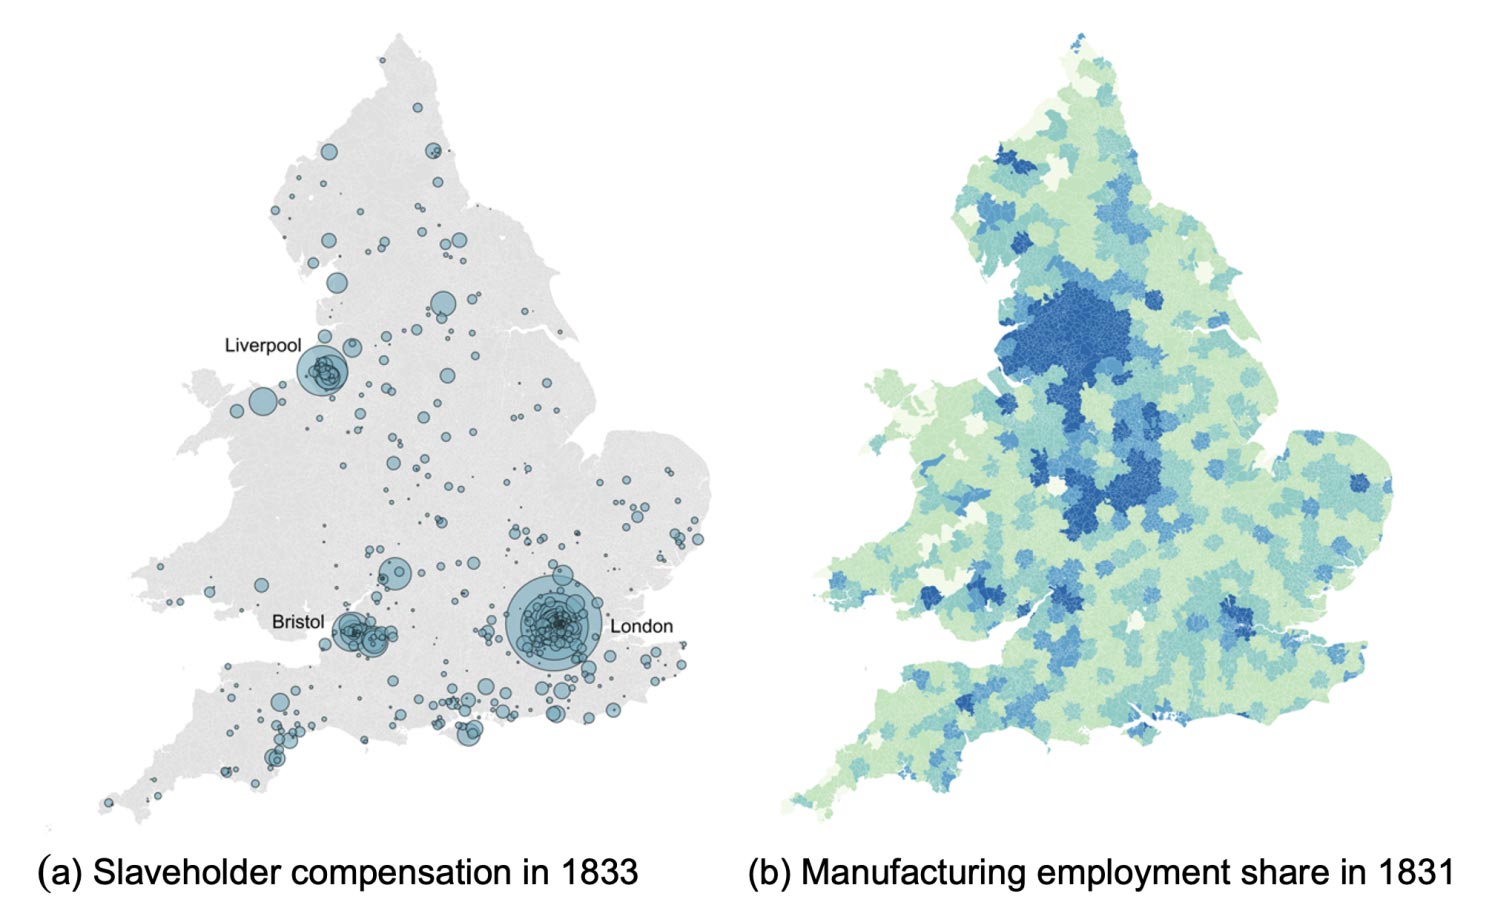 Figure 1: Slaveholding and structural transformation in the 1830s. (Left panel) Slaveholder compensation in each parish in 1833 pounds sterling; size of blue circles proportional to the total value of slaveholder compensation in each region. The largest three slave trading ports by enslaved persons embarked are labelled. (Right panel) Manufacturing employment share in each region in the 1831 census; darker blue colours correspond to higher values; lighter green colours correspond to lower values.